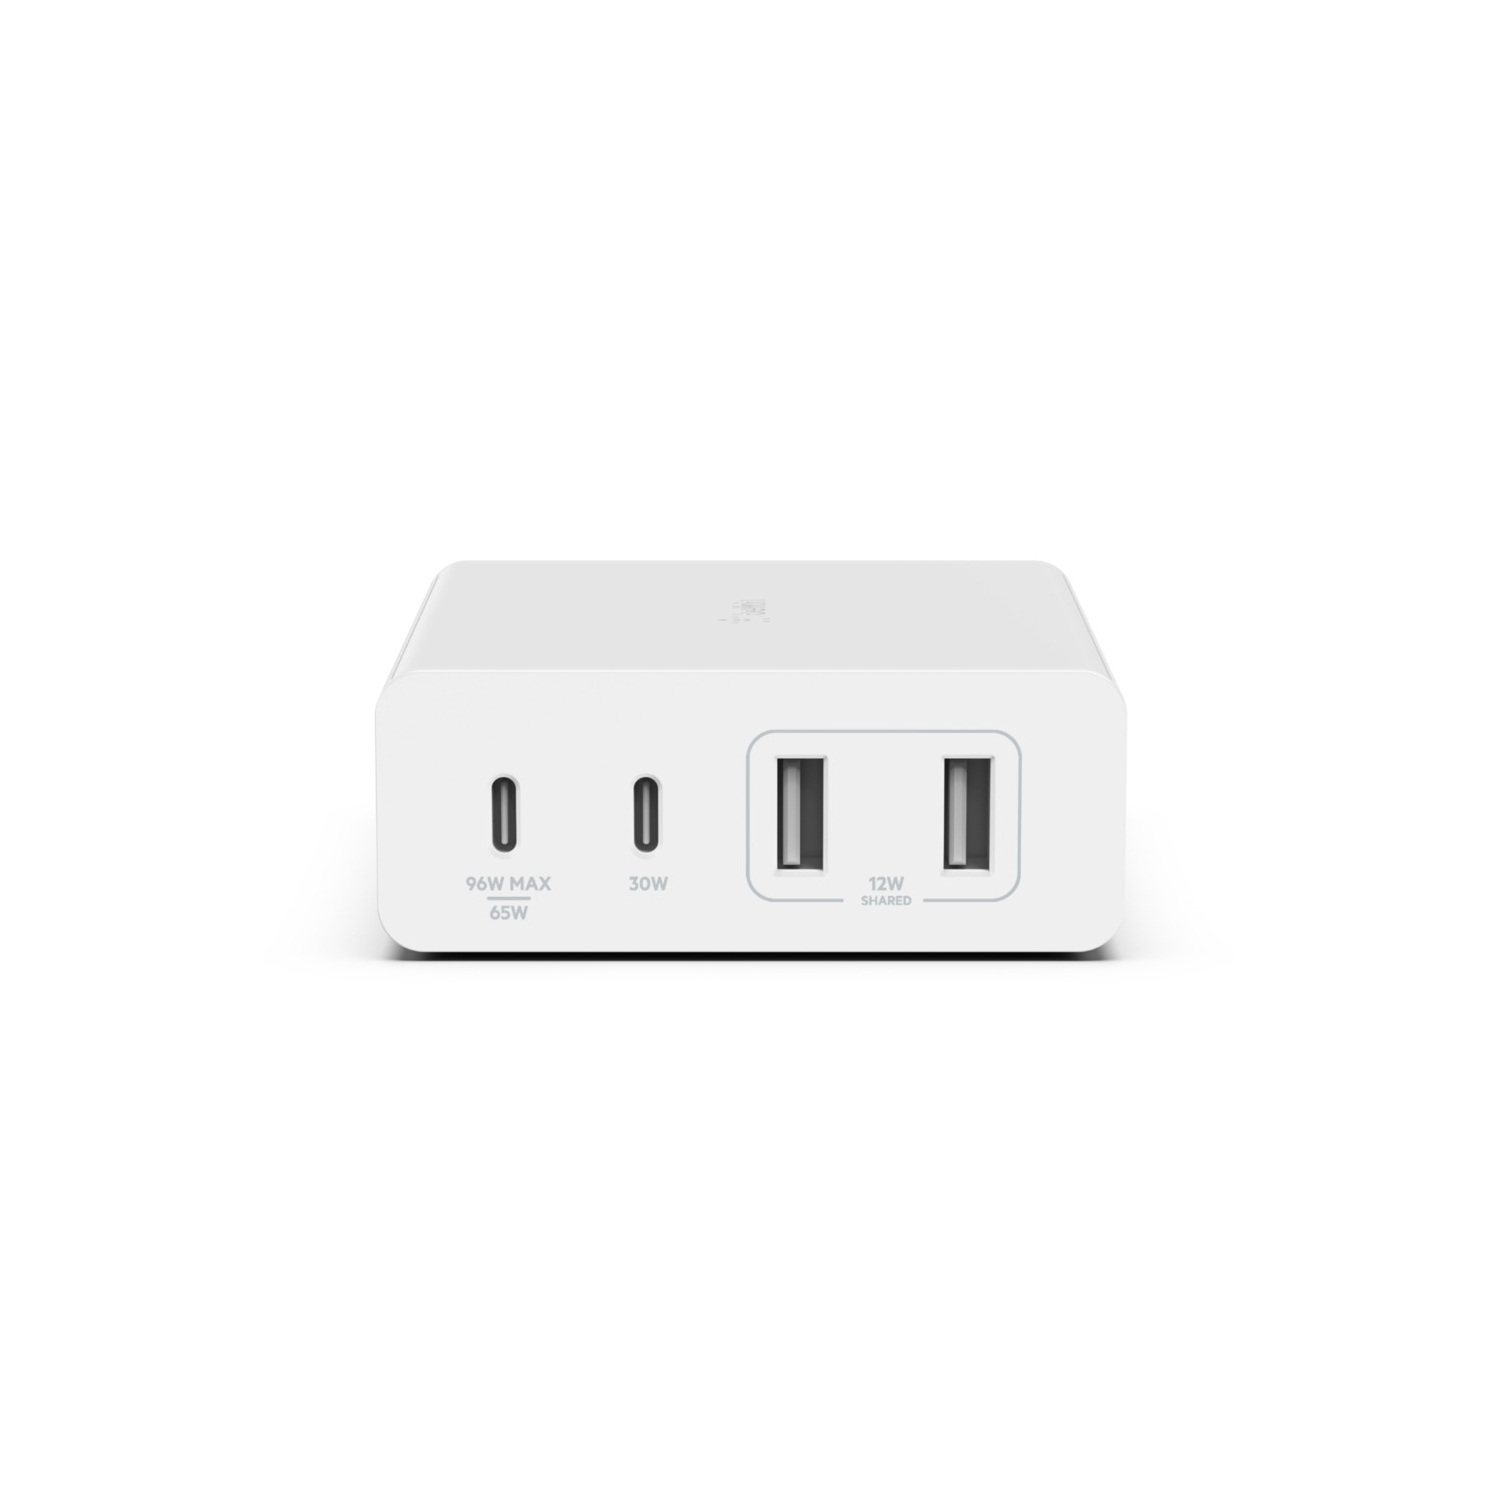 Belkin Boost Charge Pro 108W 4-Port GaN Charger with 2m Power Cord - White  - (WCH010dqWH)